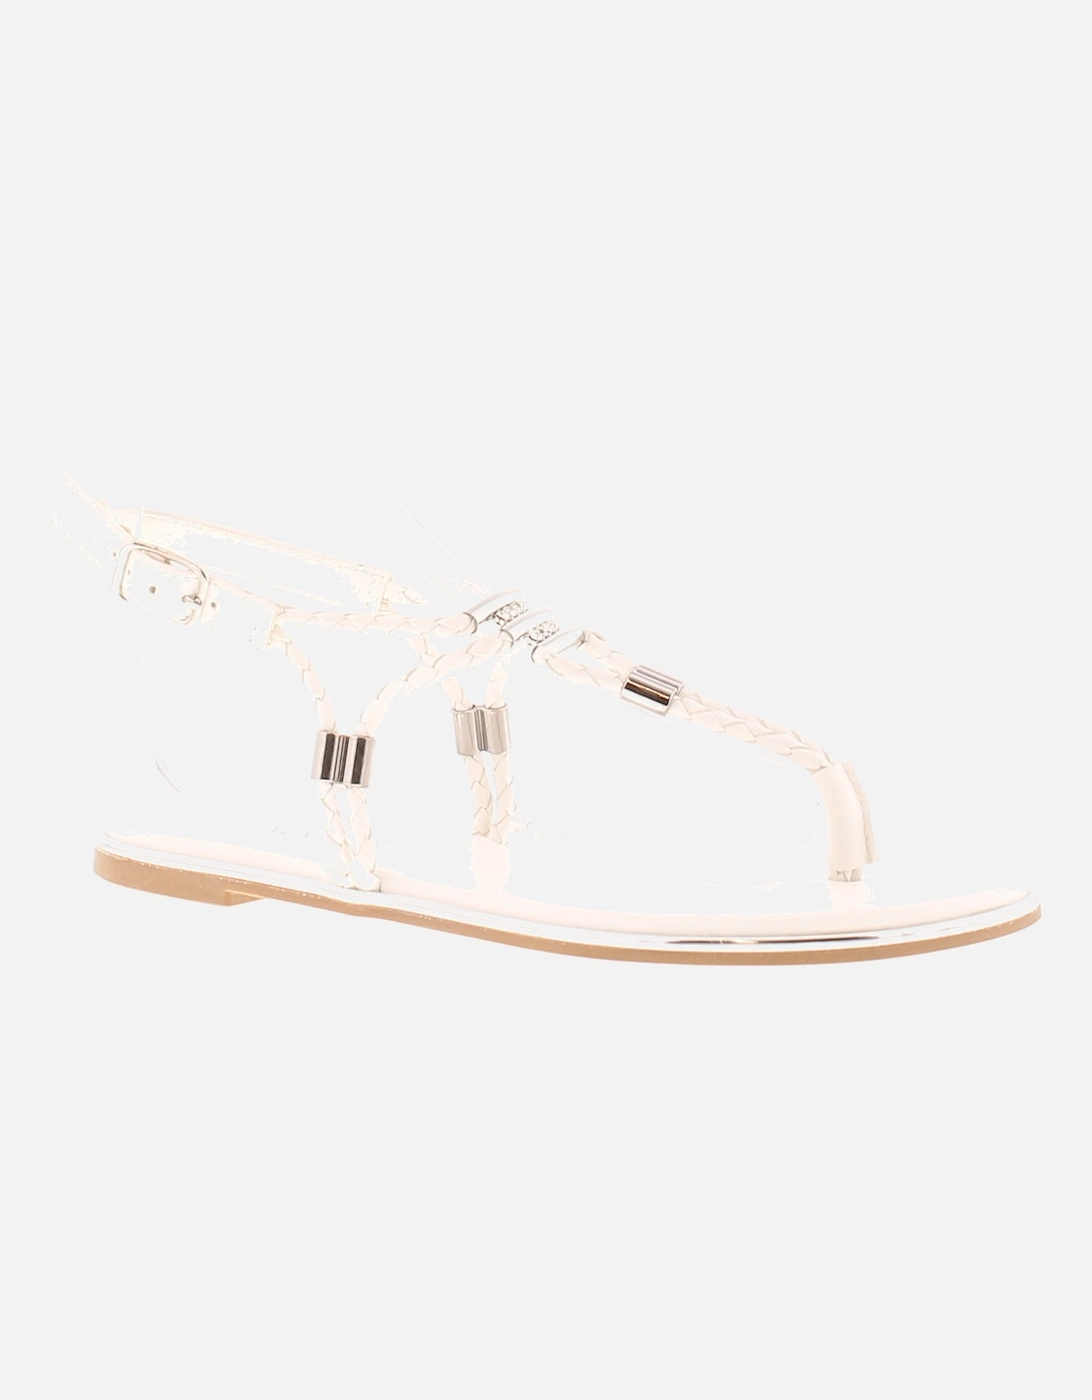 Womens Flat Sandals Toe-Post Blunt Buckle white UK Size, 6 of 5